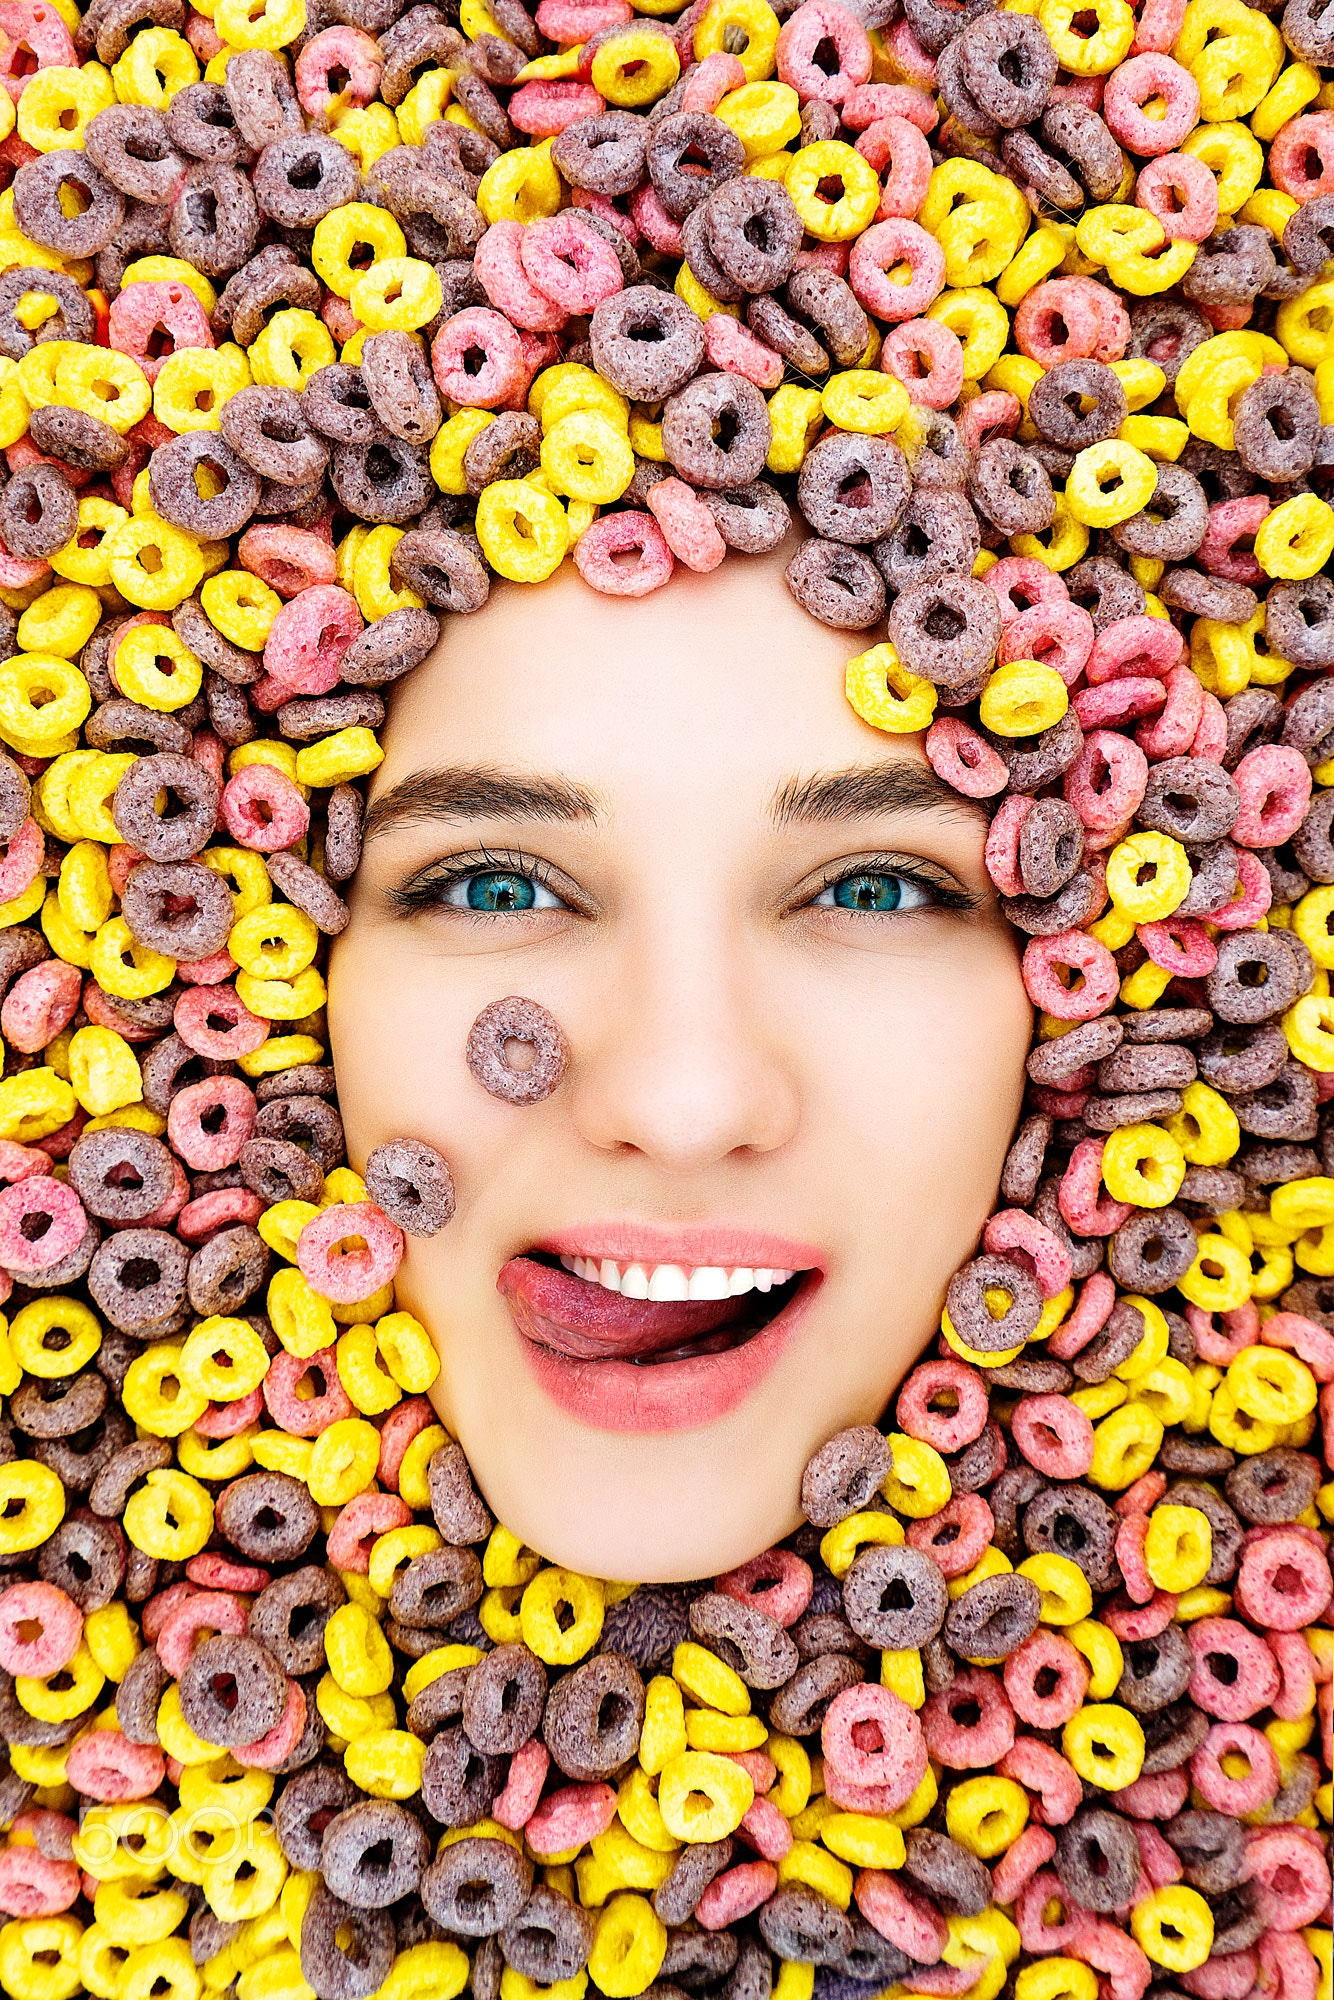 Daria Klepikova Women Food Cereal Portrait Blue Eyes Tongue Out Makeup Colorful 1334x2000